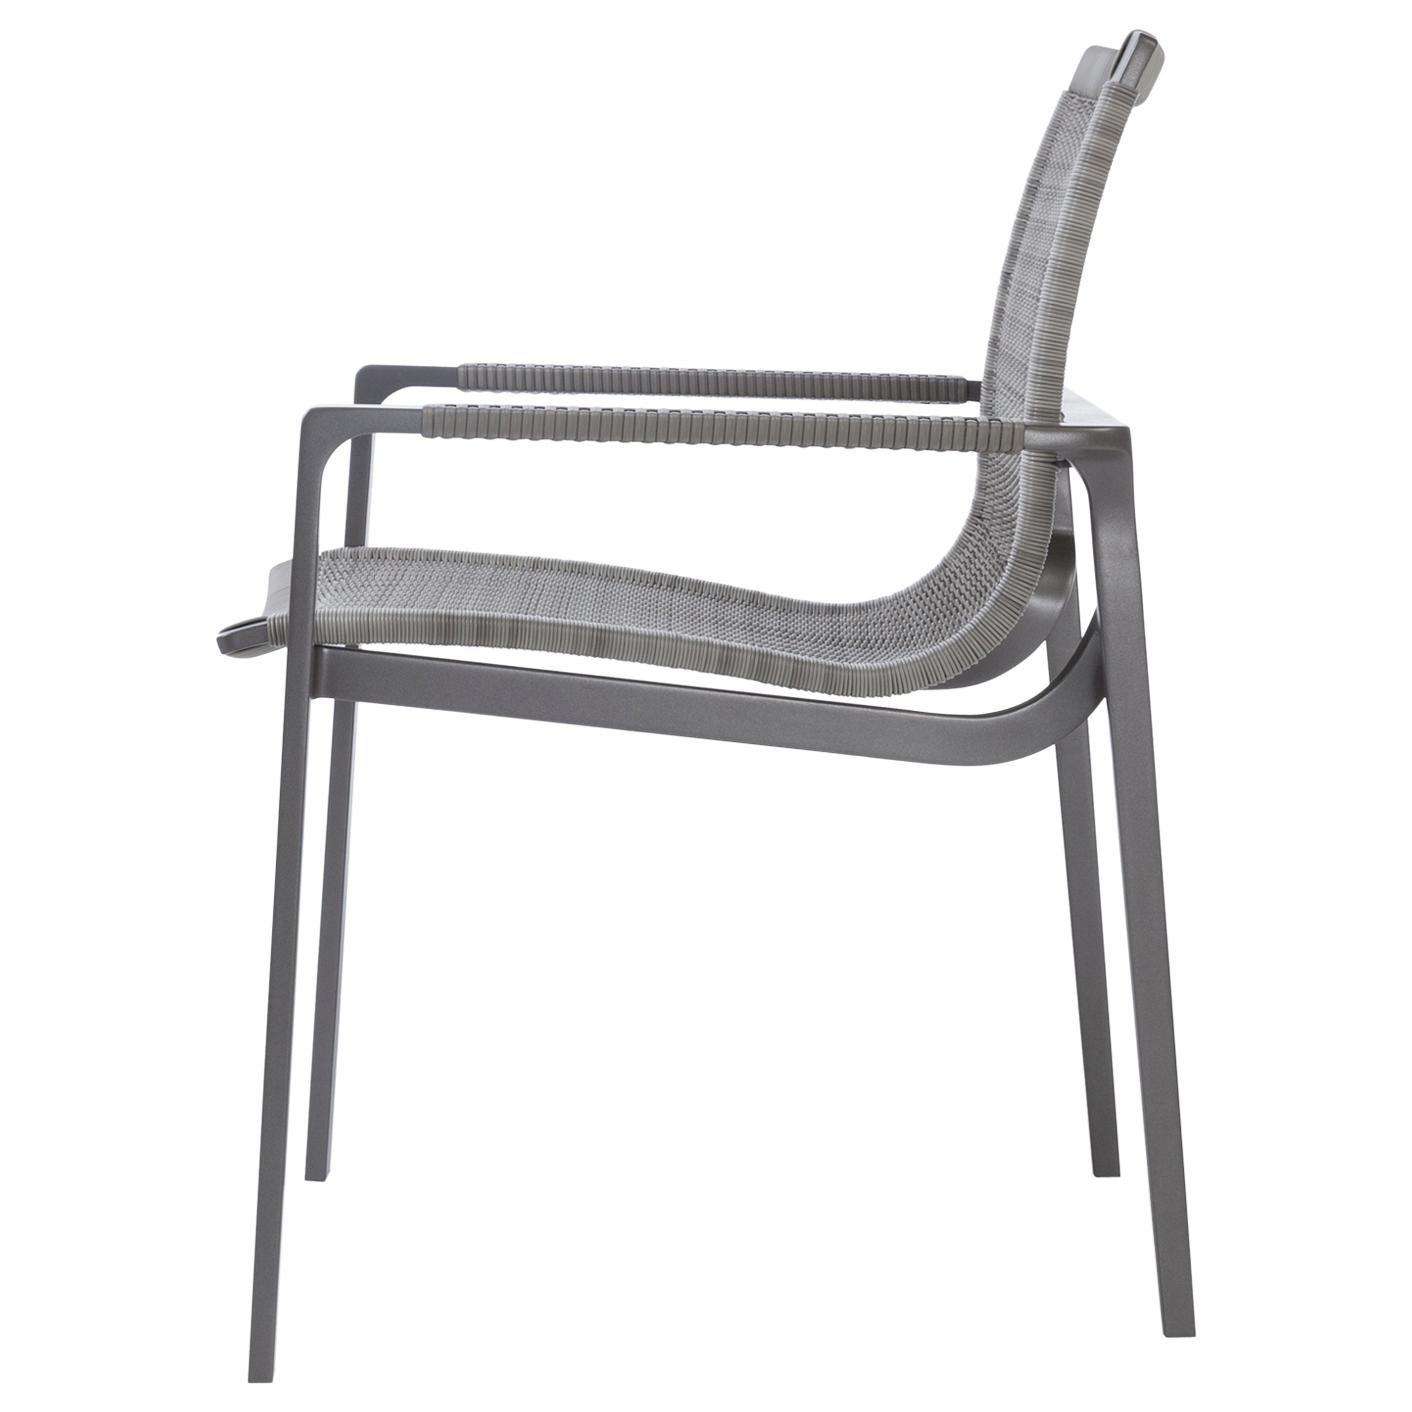 HOLLY HUNT Outdoor Keel Dining Chair in Oyster Finish Metal & Woven Fiber